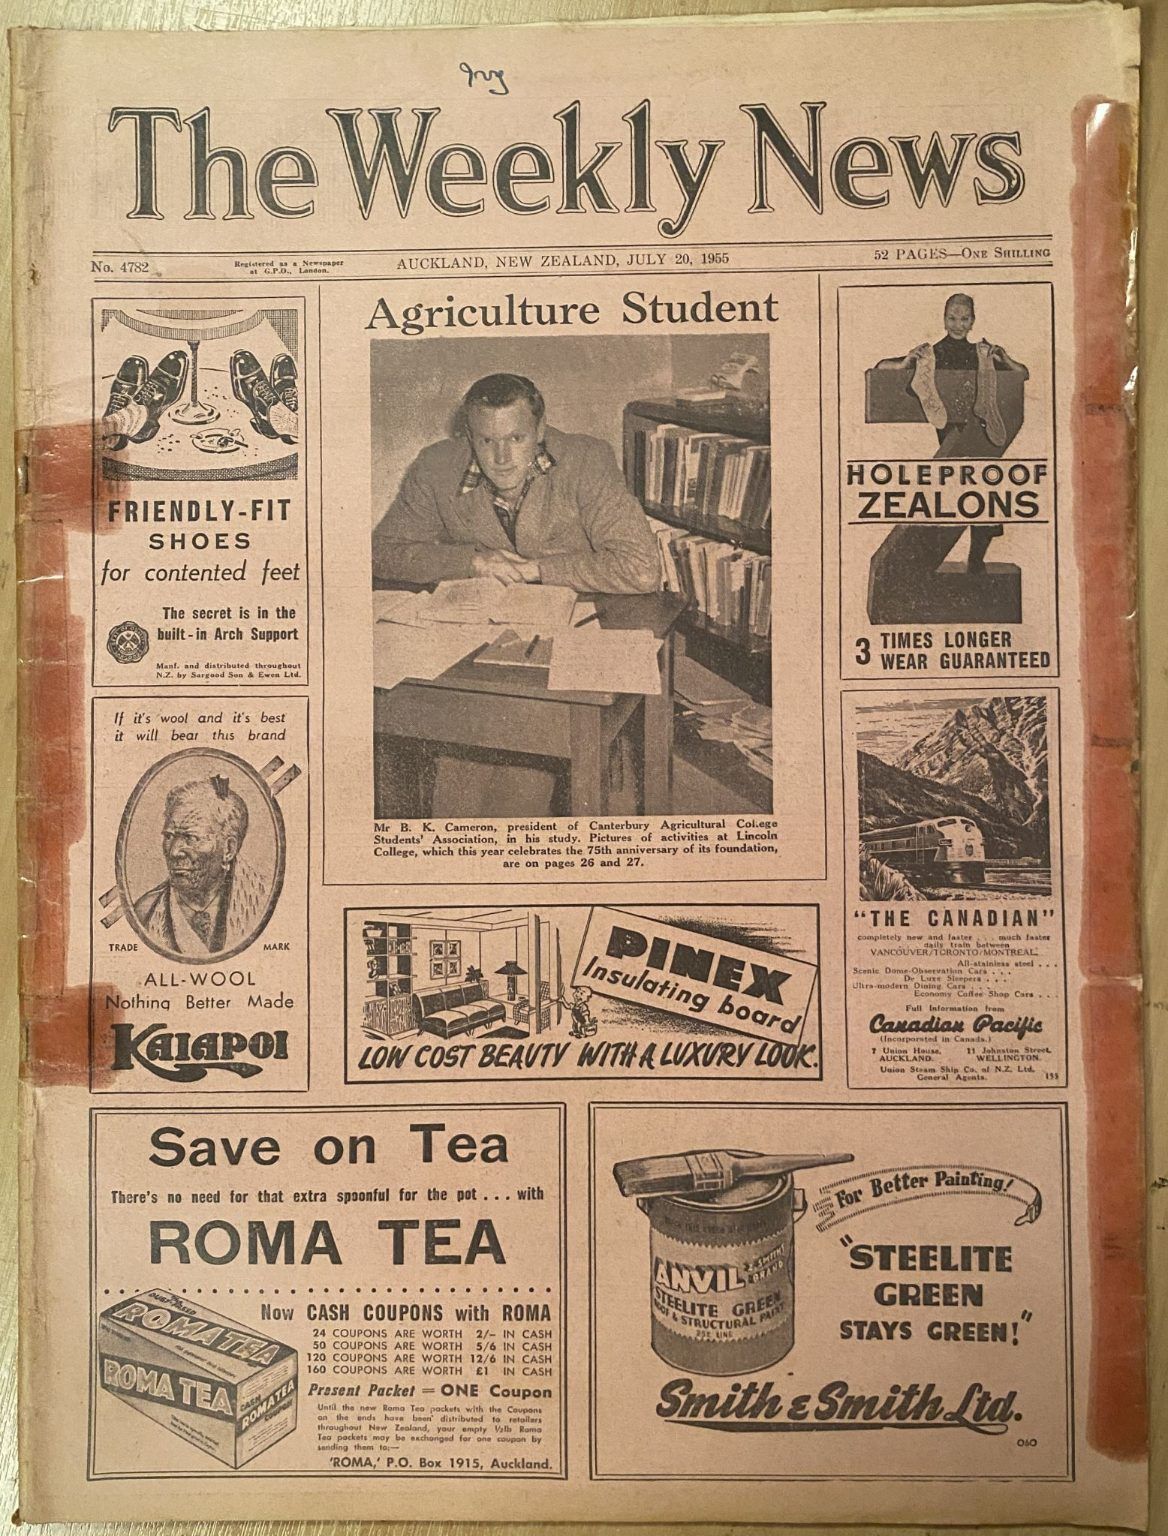 OLD NEWSPAPER: The Weekly News - No. 4782, 20 July 1955